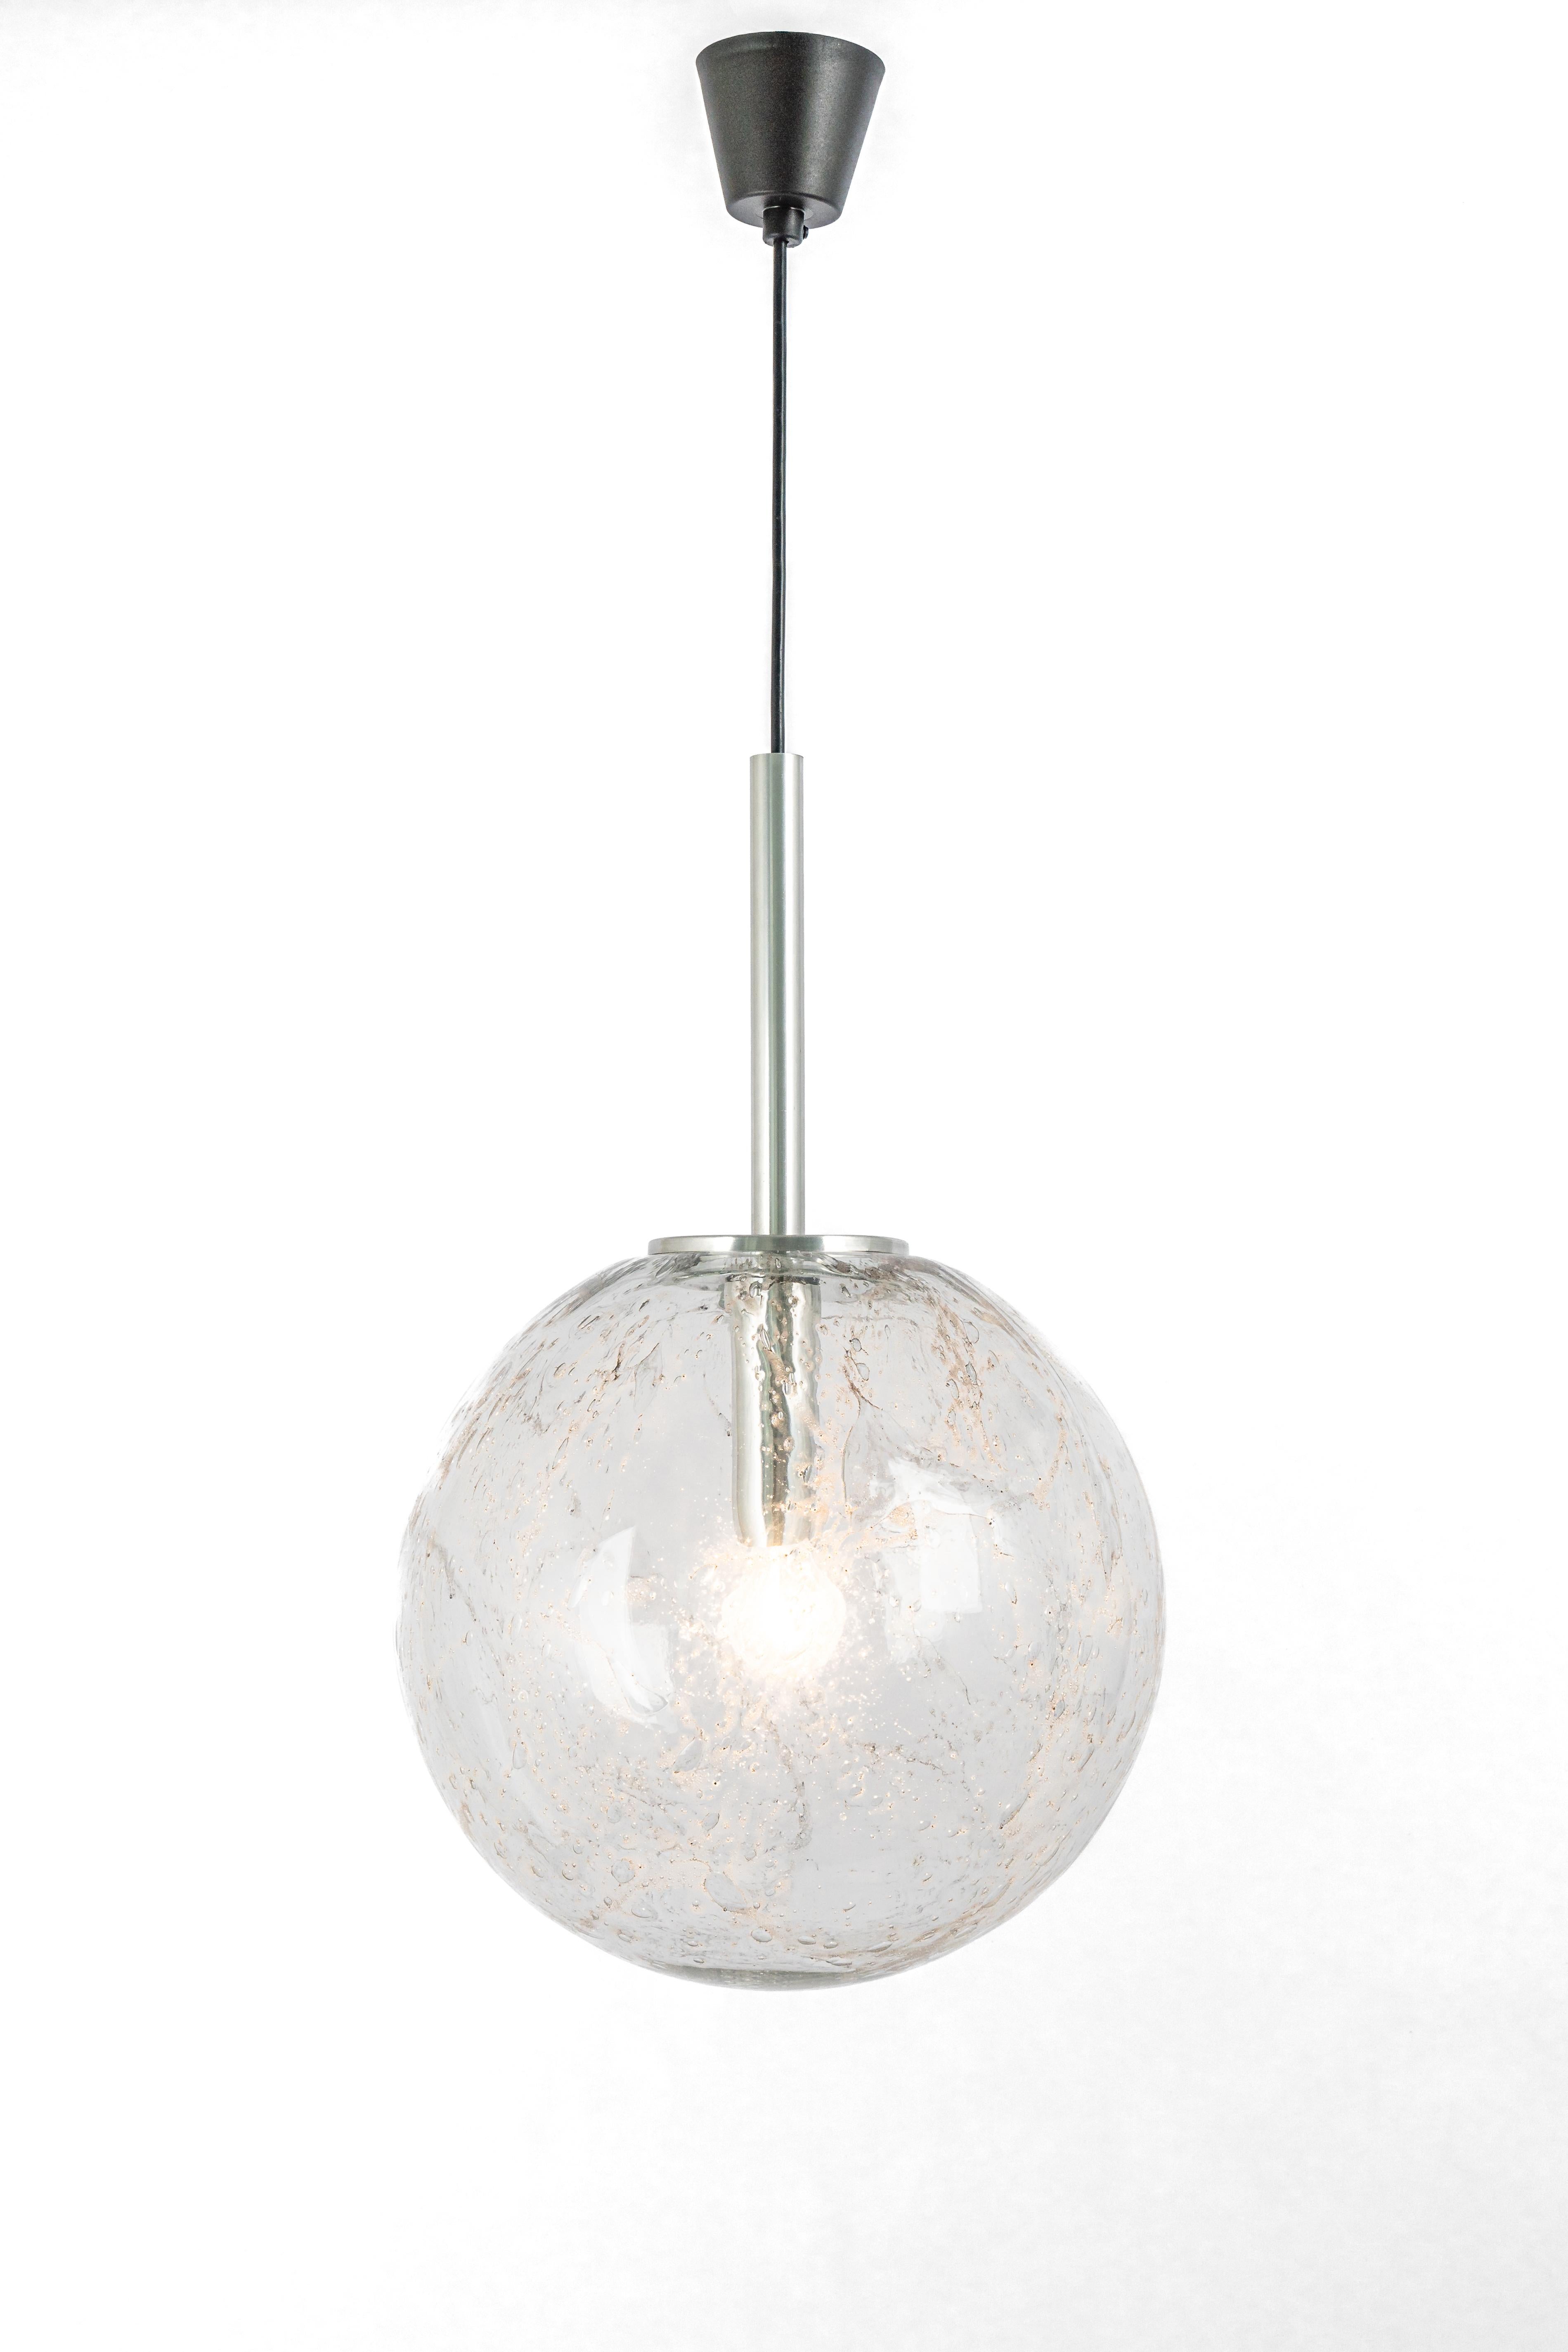 Large Murano Ball Pendant Light by Doria, Germany, 1970s For Sale 3